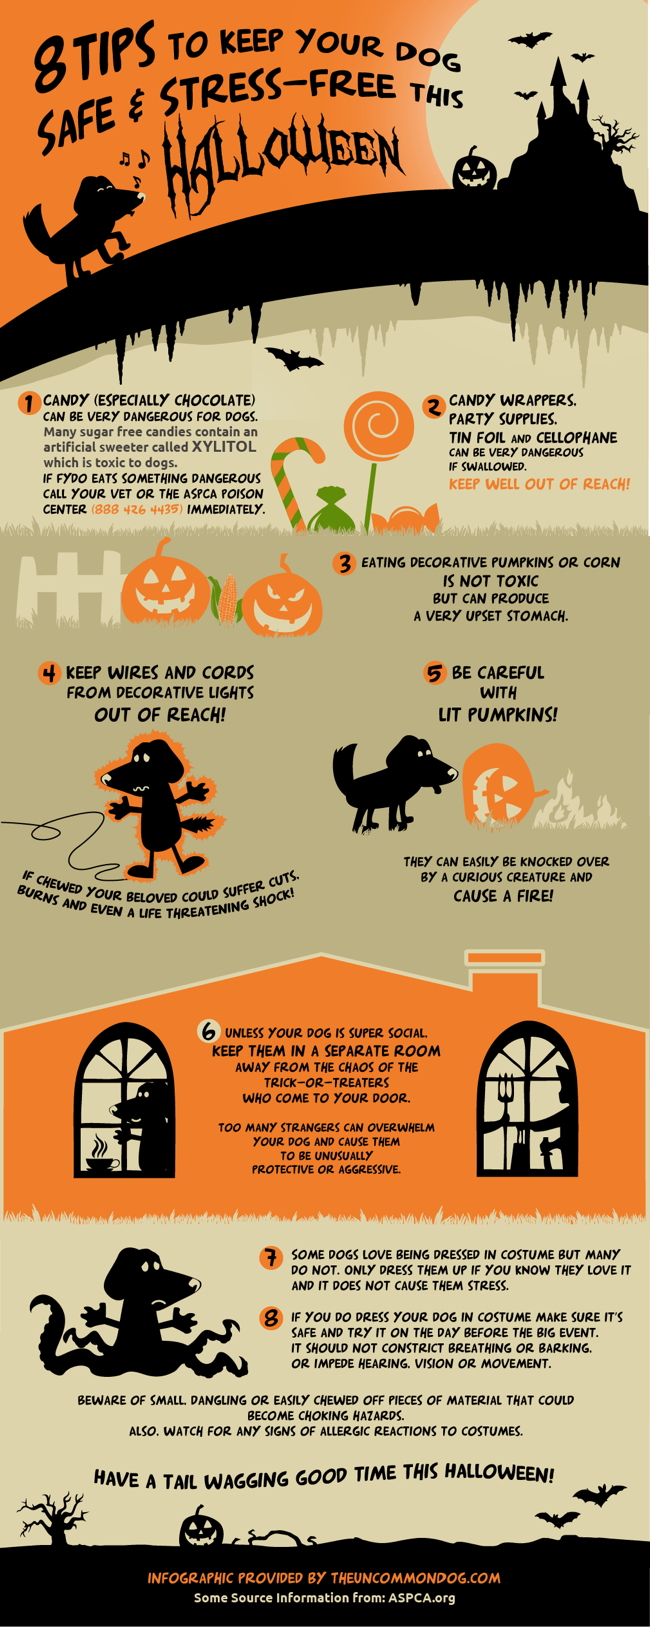 8 Tips to Keep Your Dog Safe & Stress Free this Halloween!